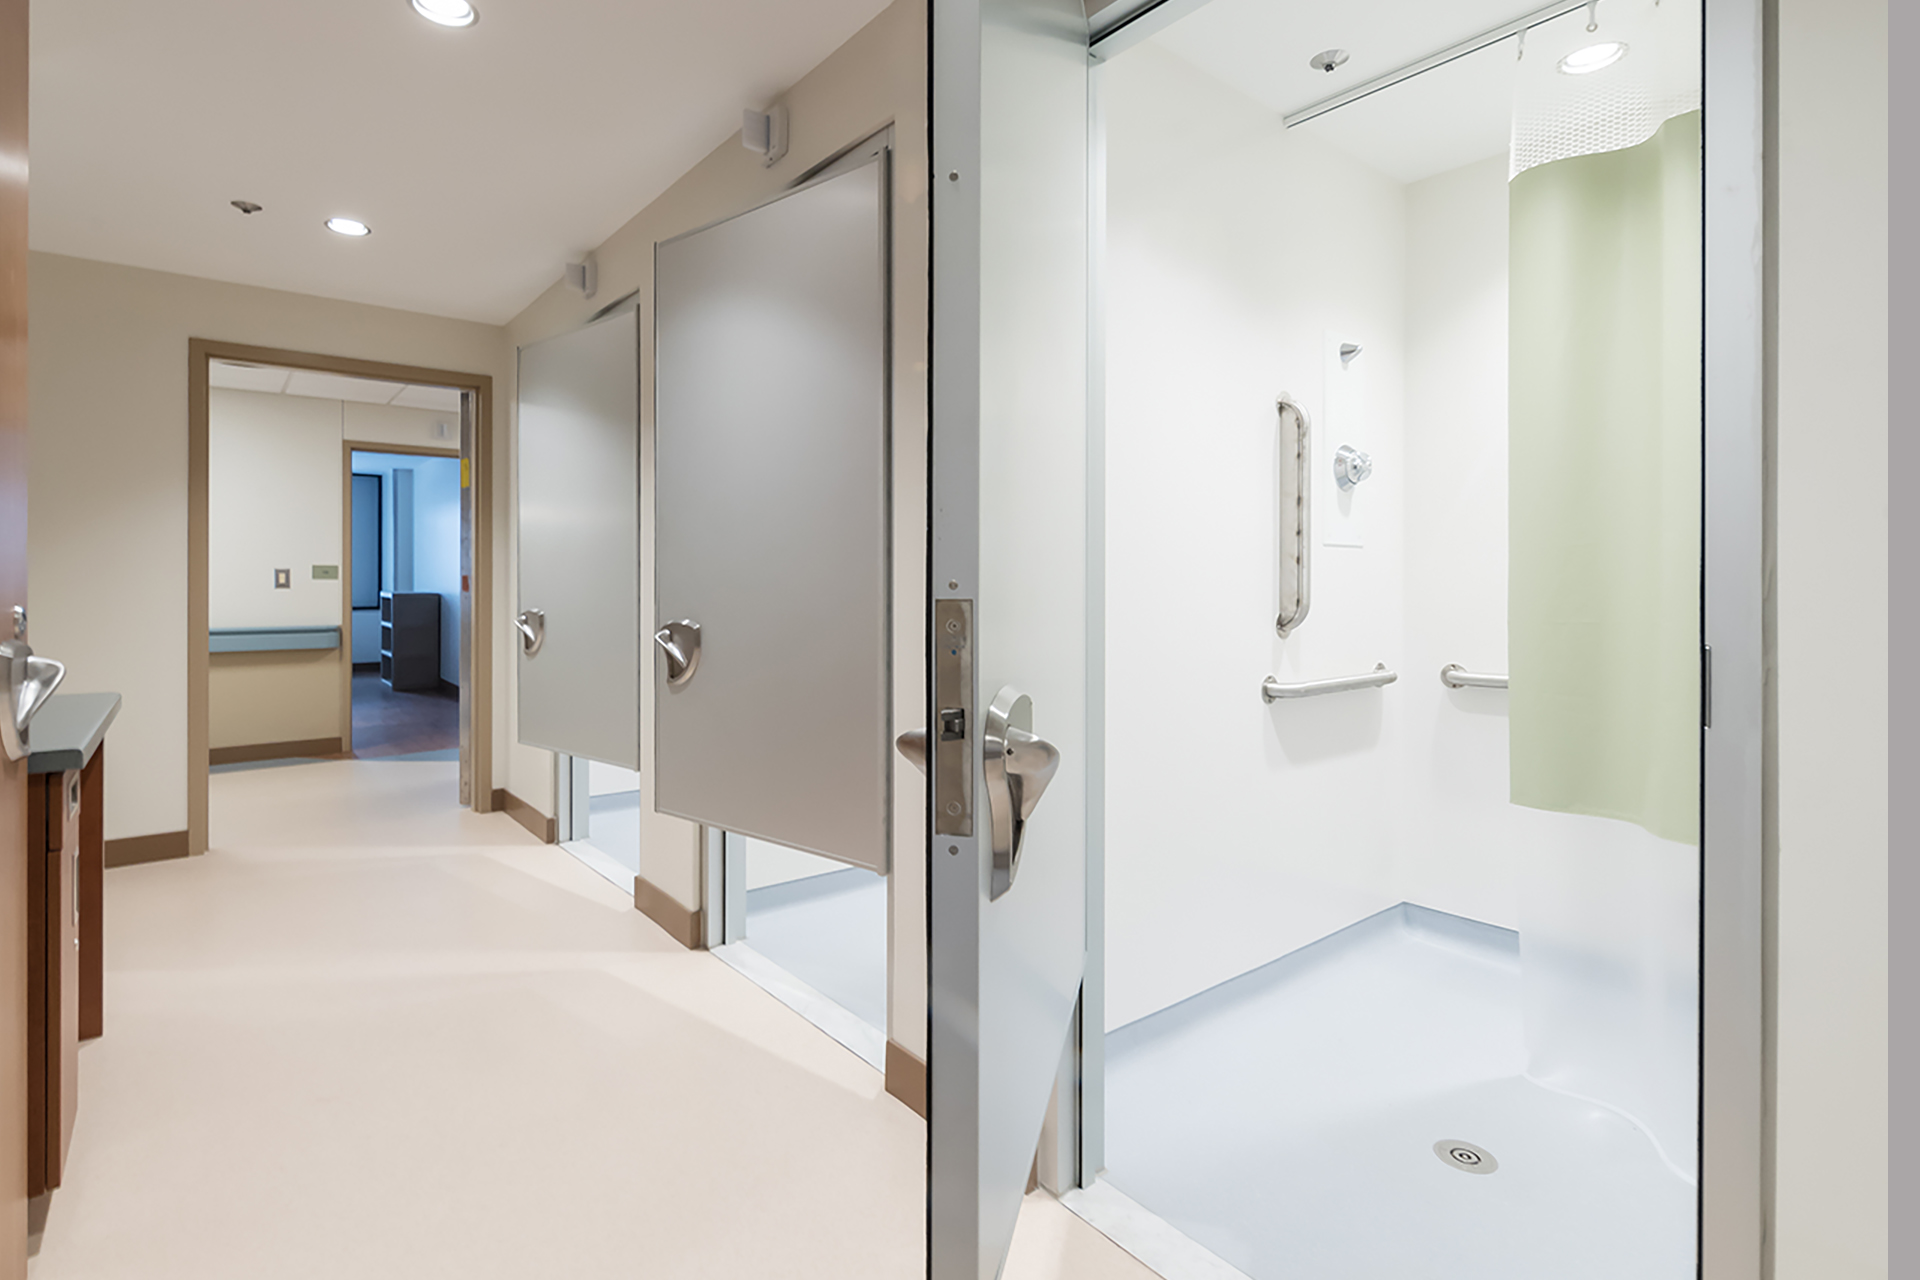 Altro floors and walls installed in a behavioral and mental health facility